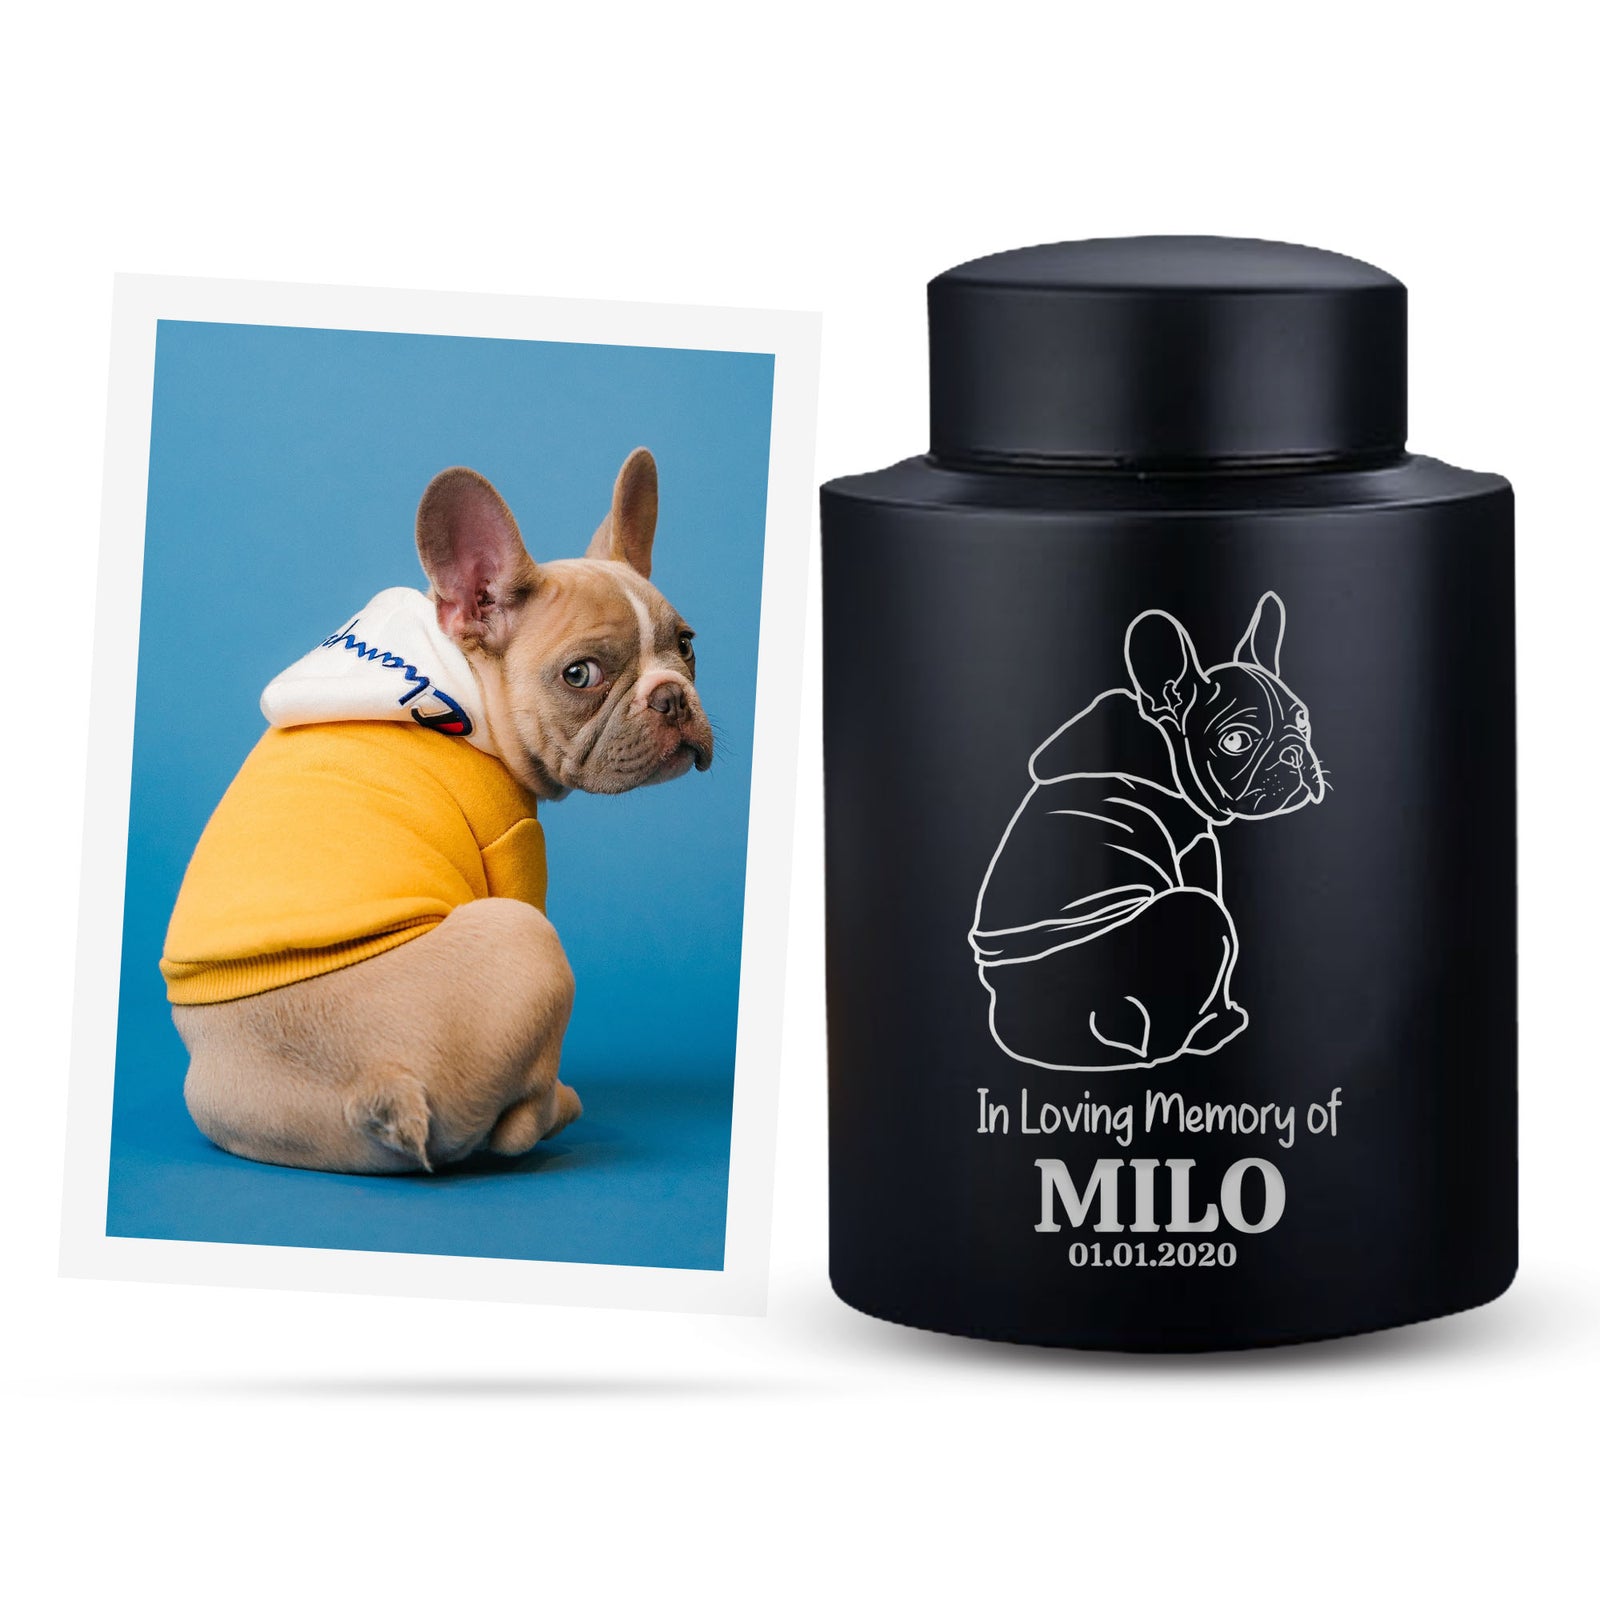 Custom Engraved Pet Photo/Image Cremation Urn – Personalized Pet Image Round Powder Coated Steel Standard Size Urn for Pet, Name, Date, and Text Engraving Included | Pet Size 30-50 lbs | Black